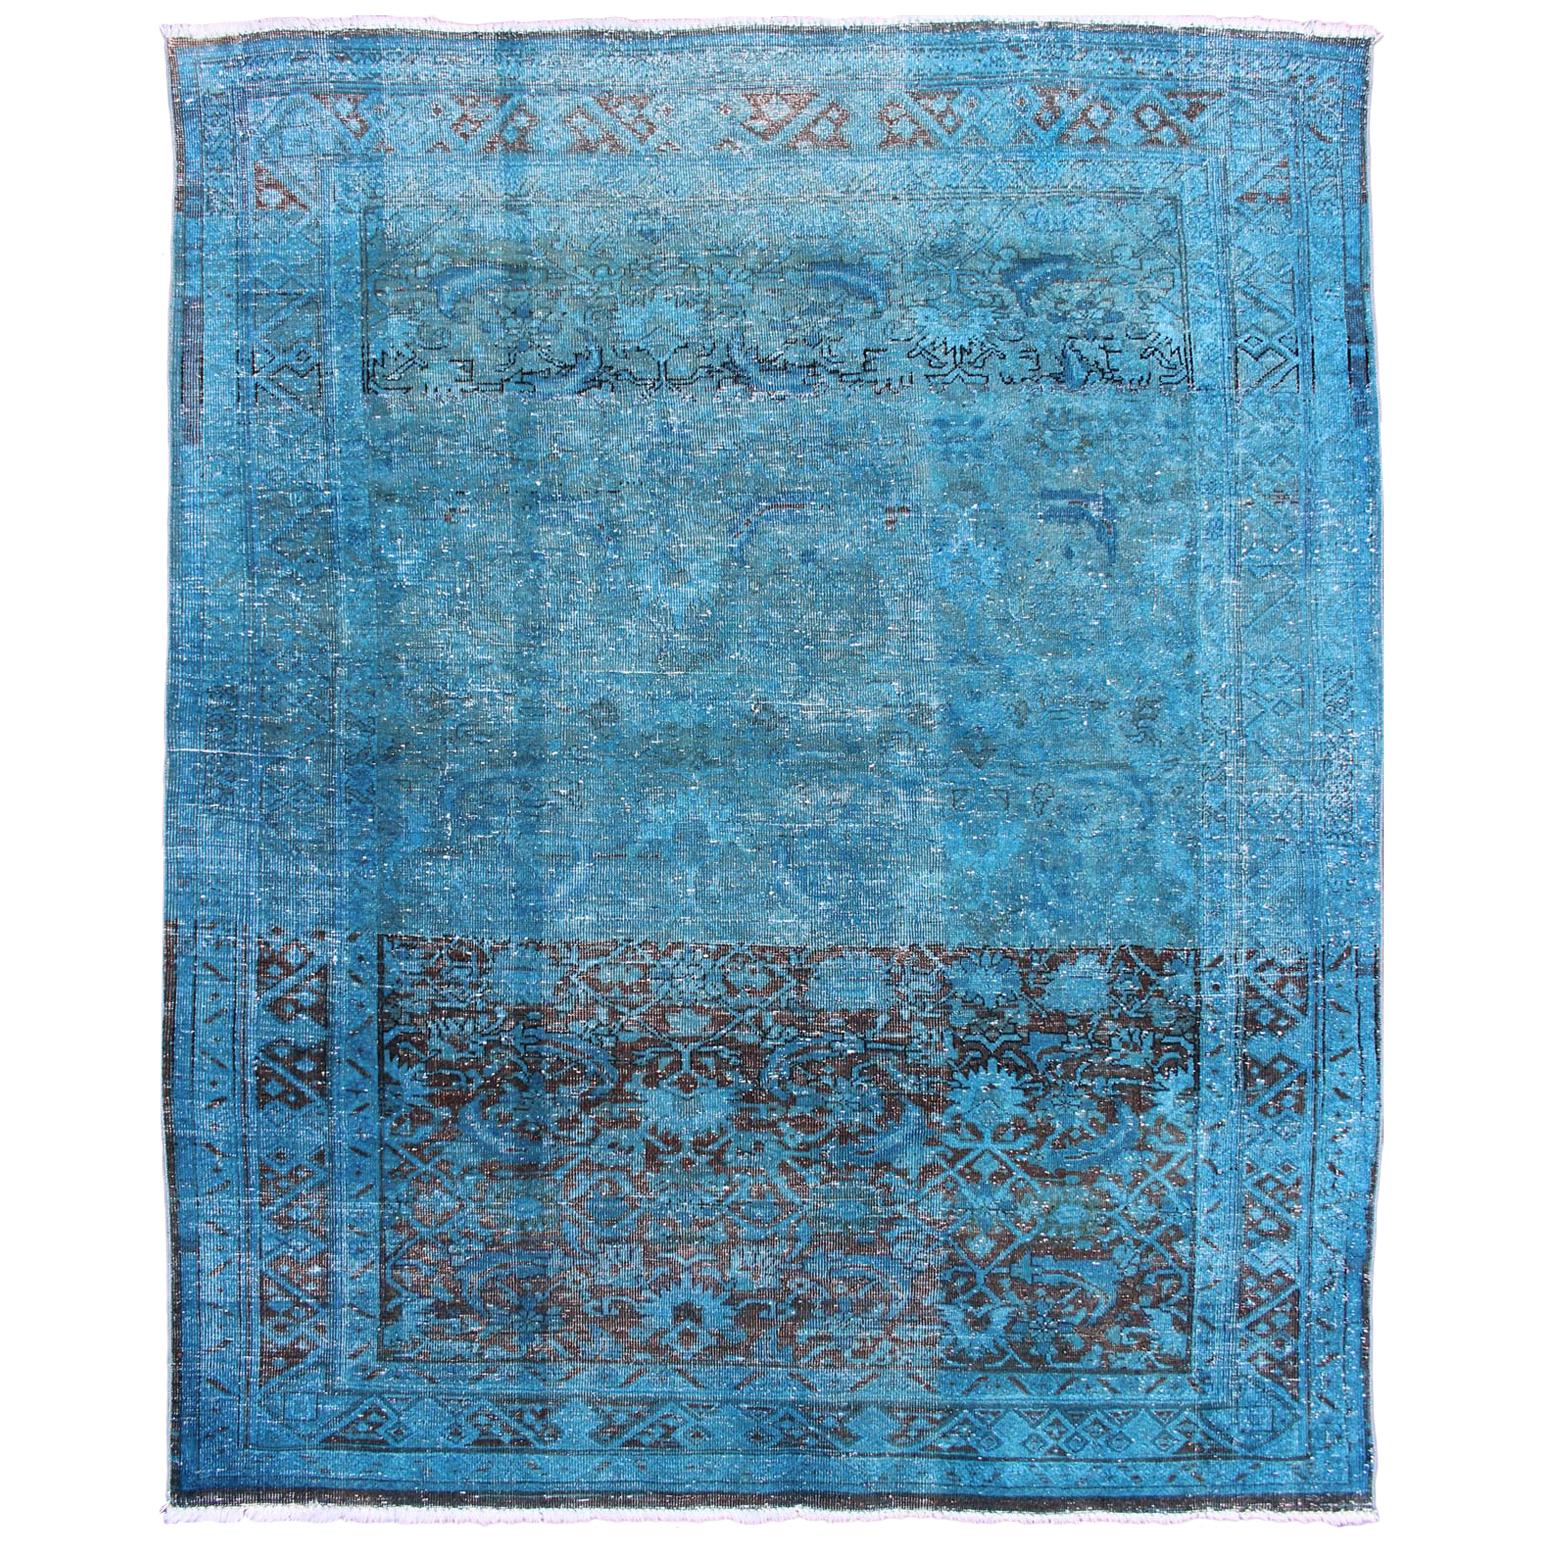 Antique Persian Malayer with All-Over Design in Blue Tones